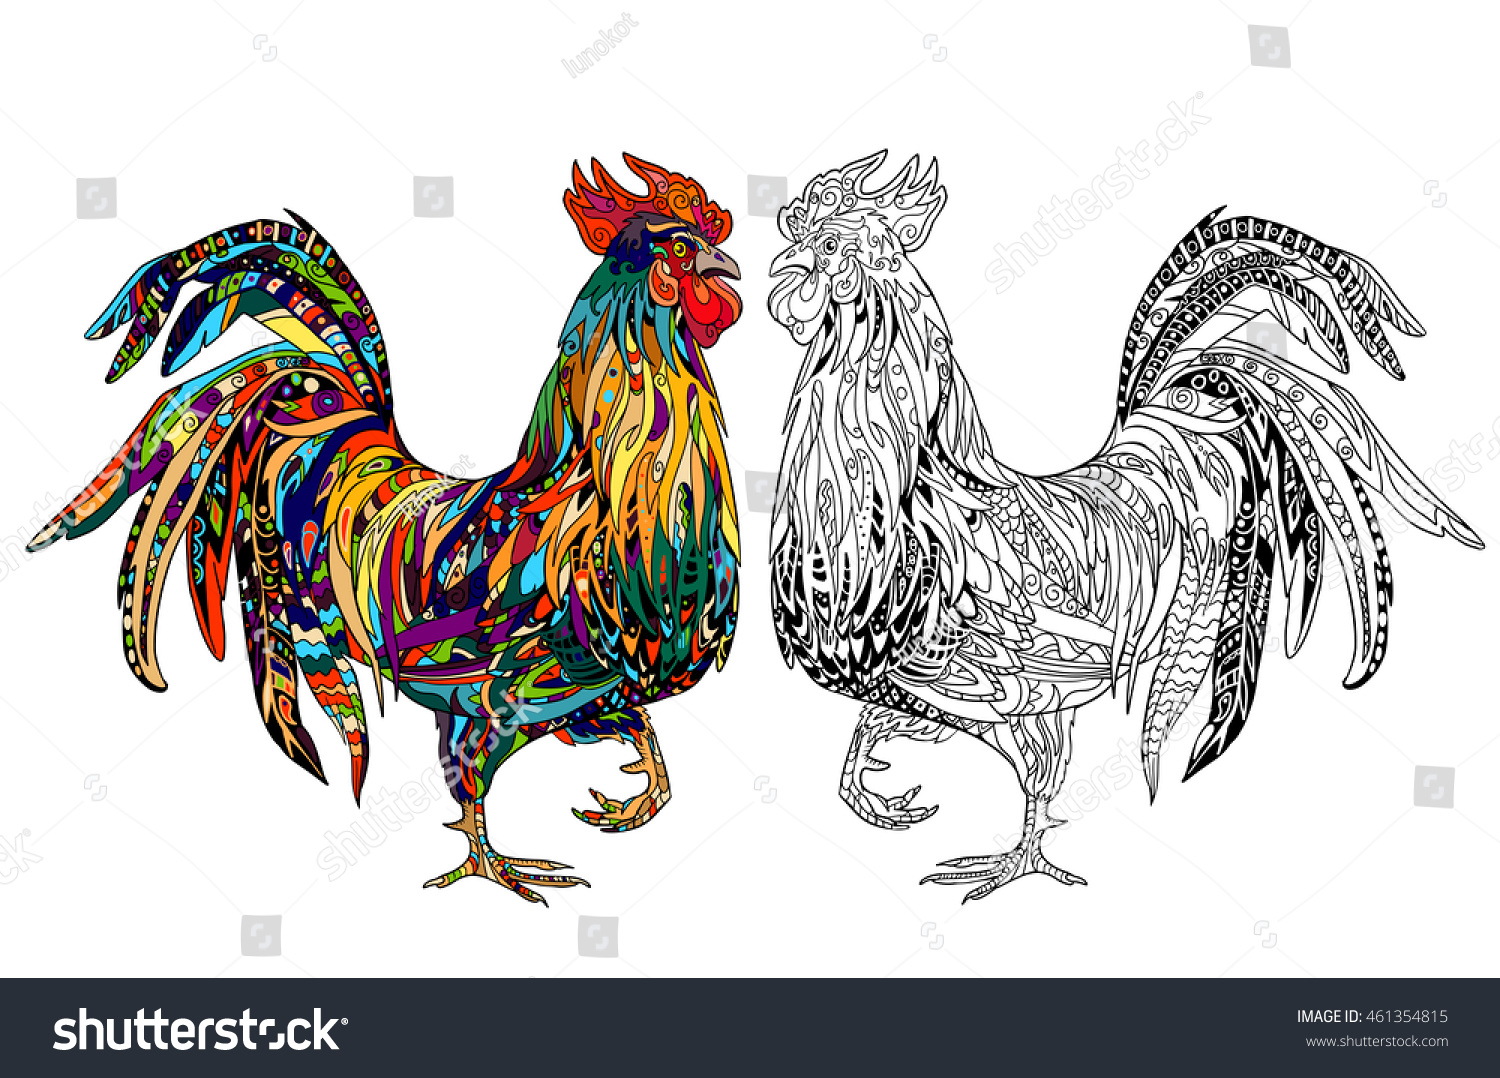 Rooster Coloring Book Page Black Ink Stock Vector 461354815 Illustration